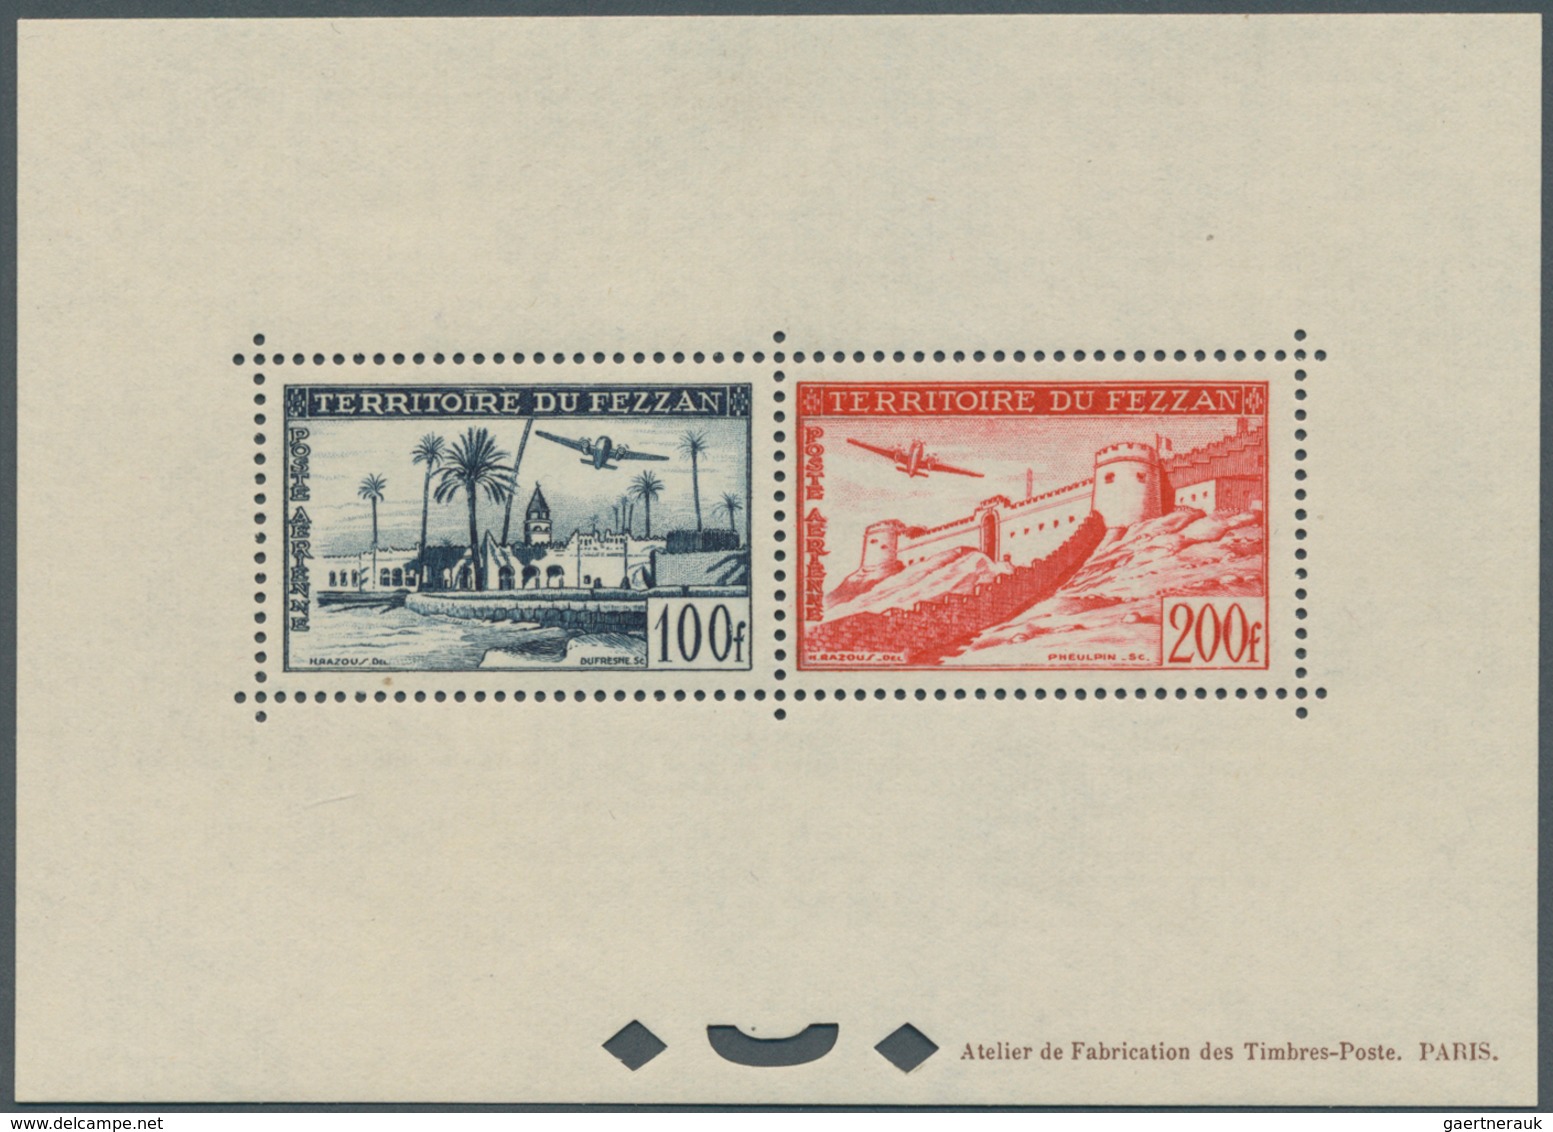 Fezzan: 1951, Airmails, Bloc Speciaux, Unmounted Mint. Very Rare, Only Few Known. Maury BS3 - Briefe U. Dokumente